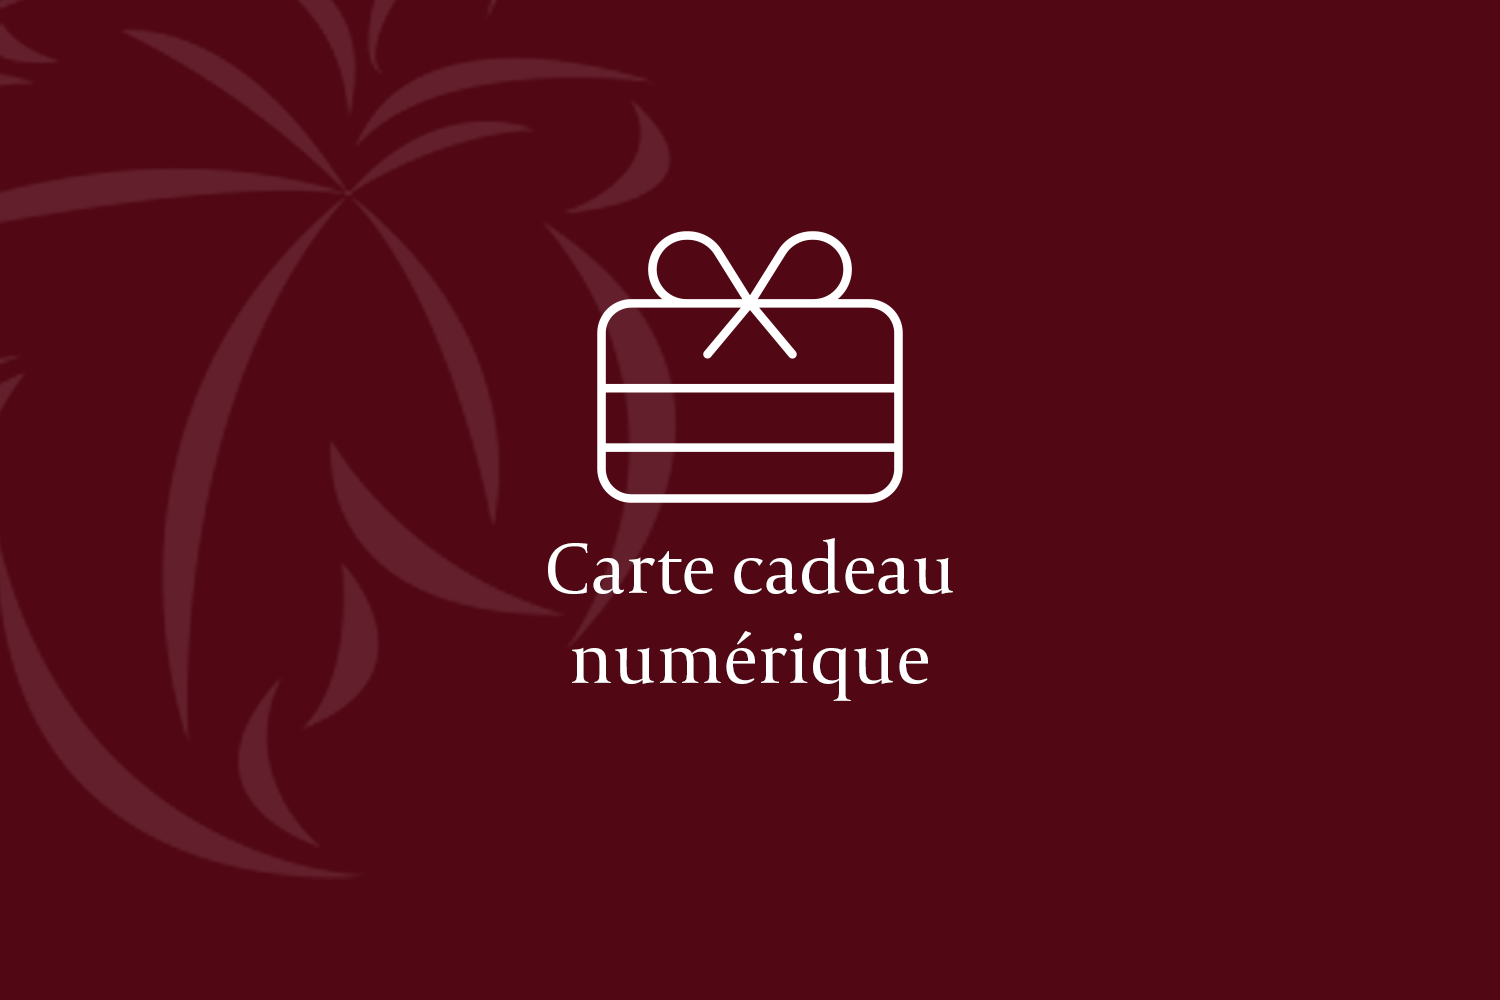 Electronic gift card